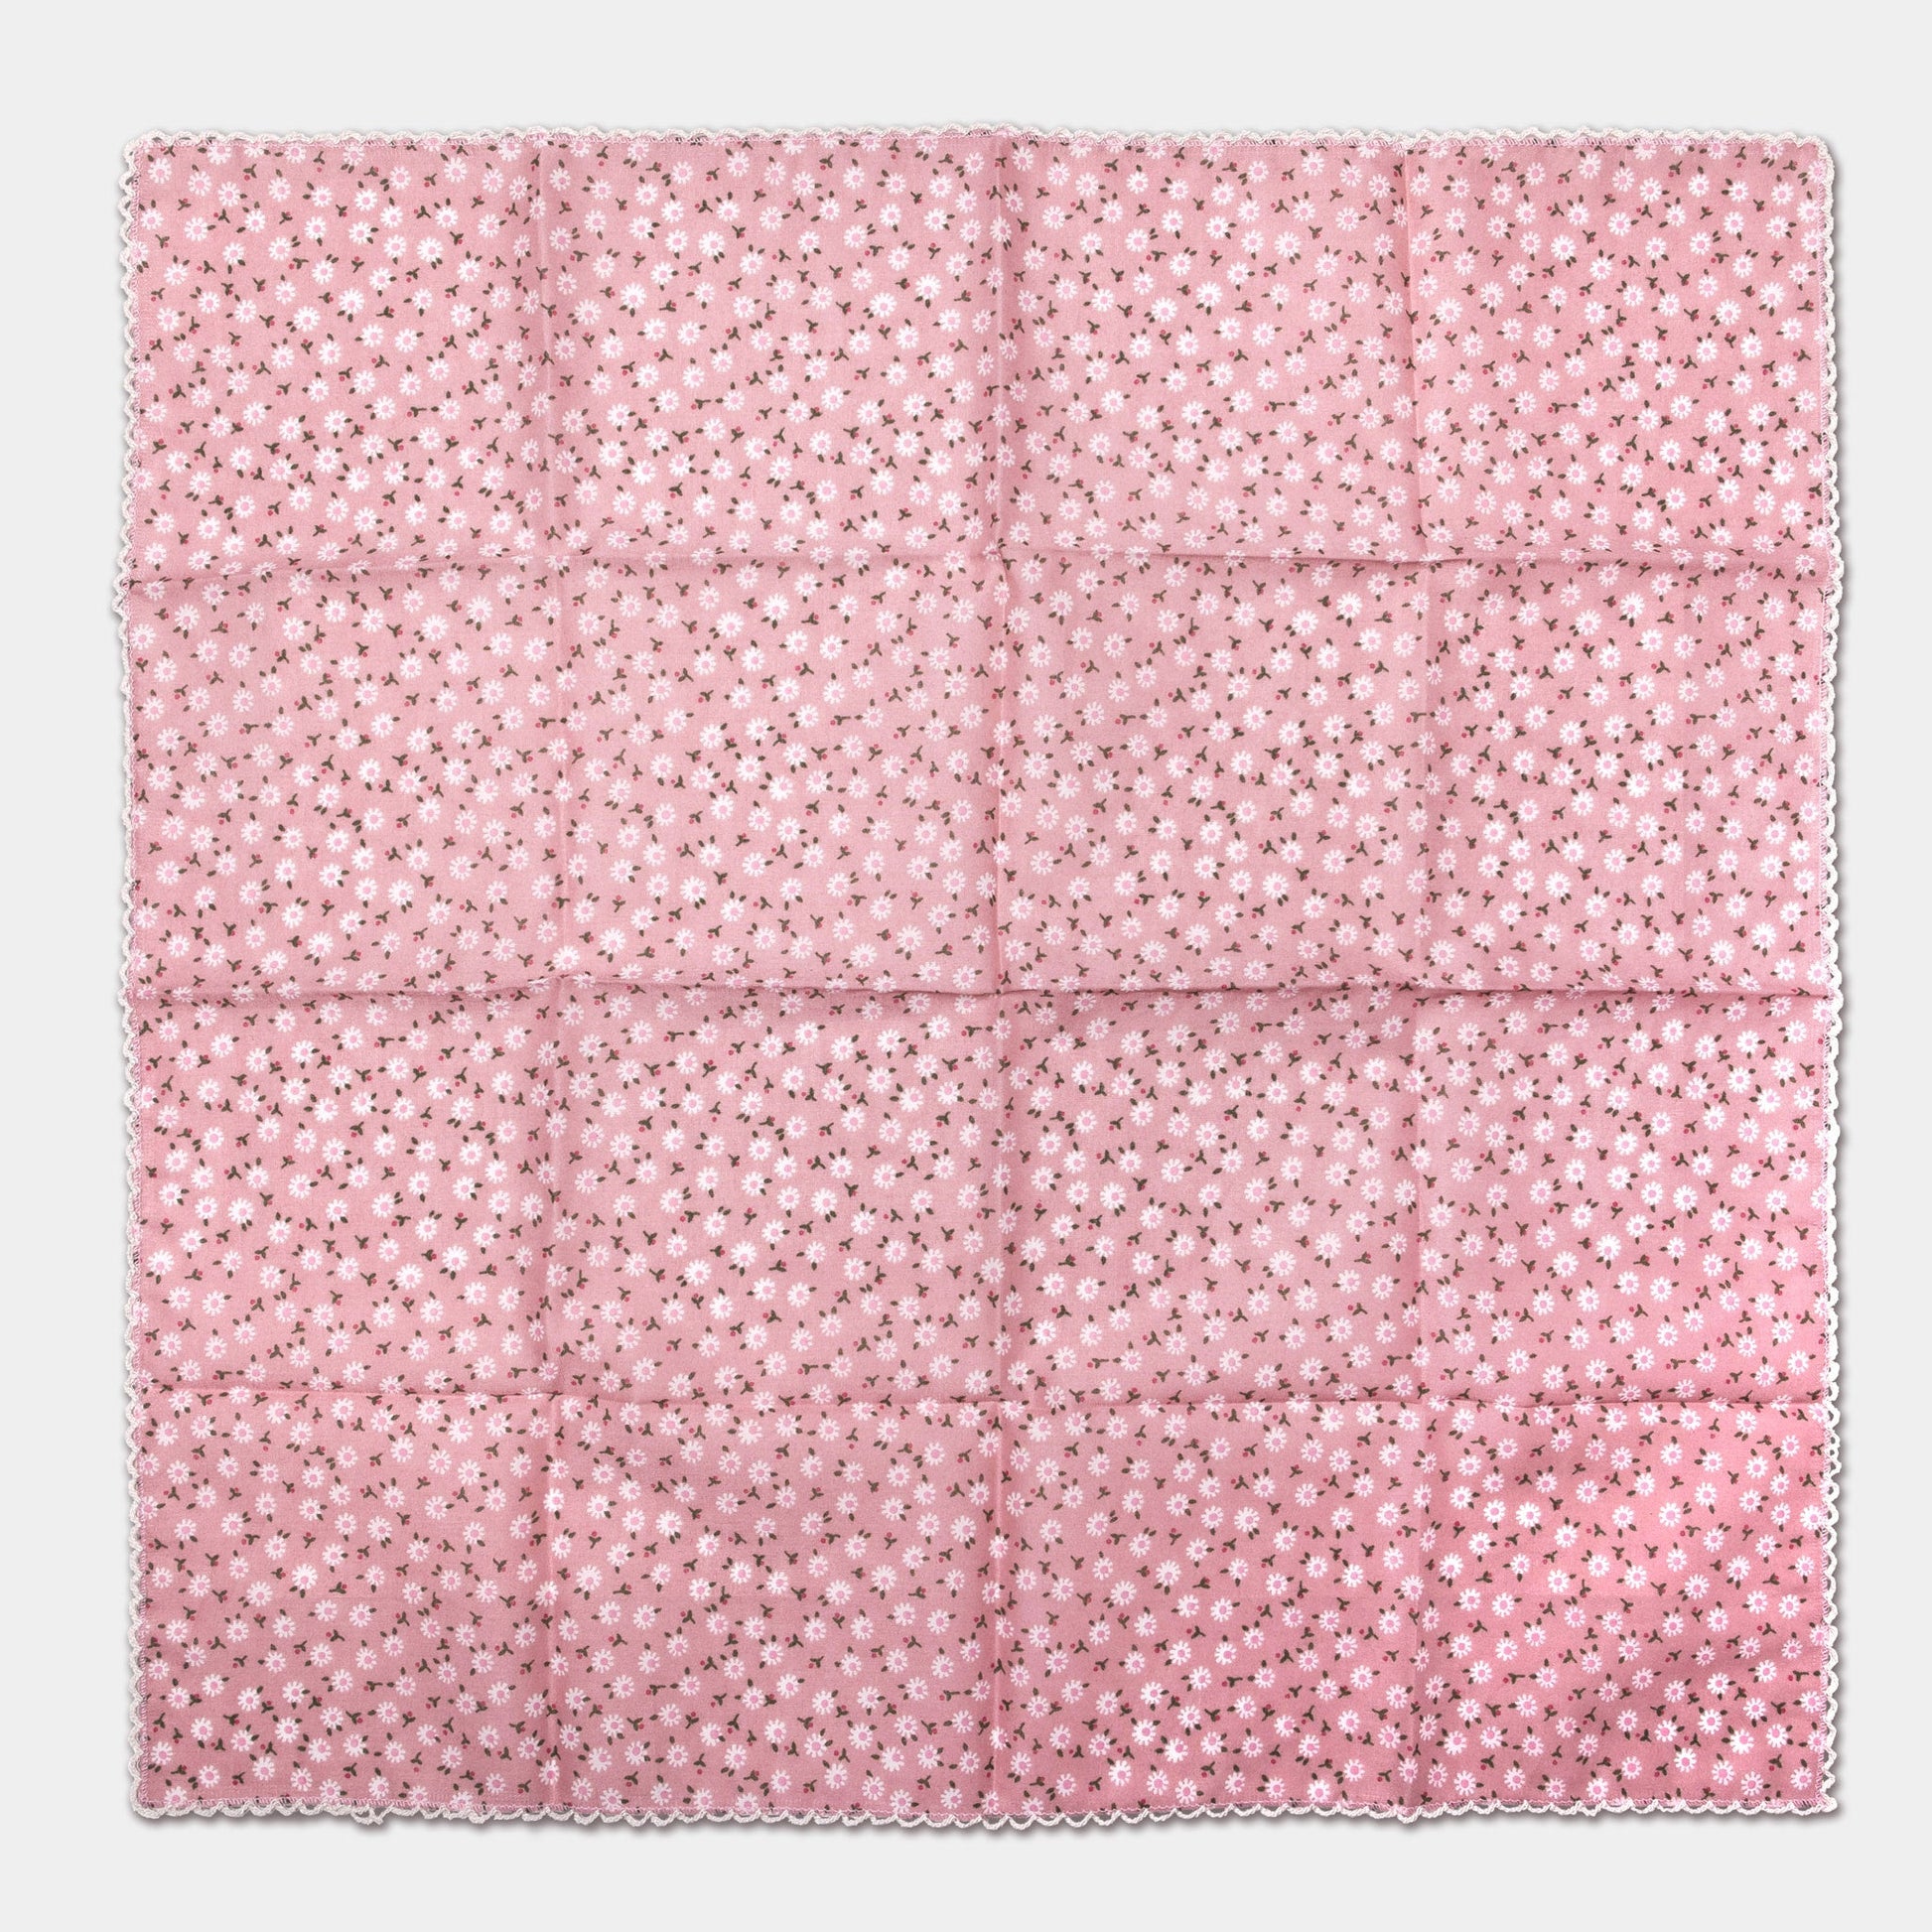 Flower Print Cotton Scarf White and Pink Flat